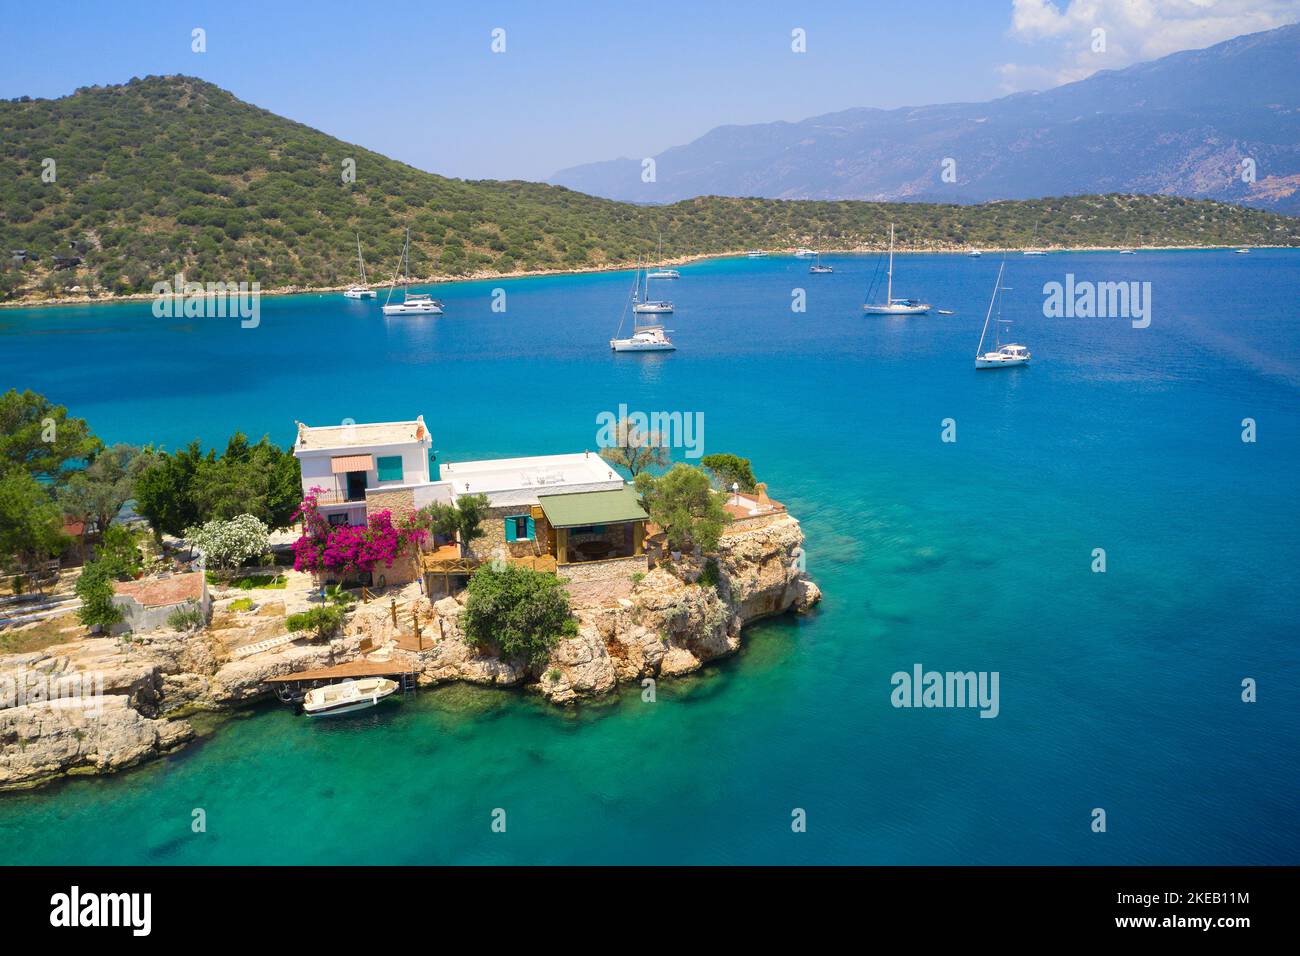 Lonely villa on the coast of the Mediterranean Sea in Turkey, Kas. Aerial view of turquoise water, mountains and yachts Stock Photo